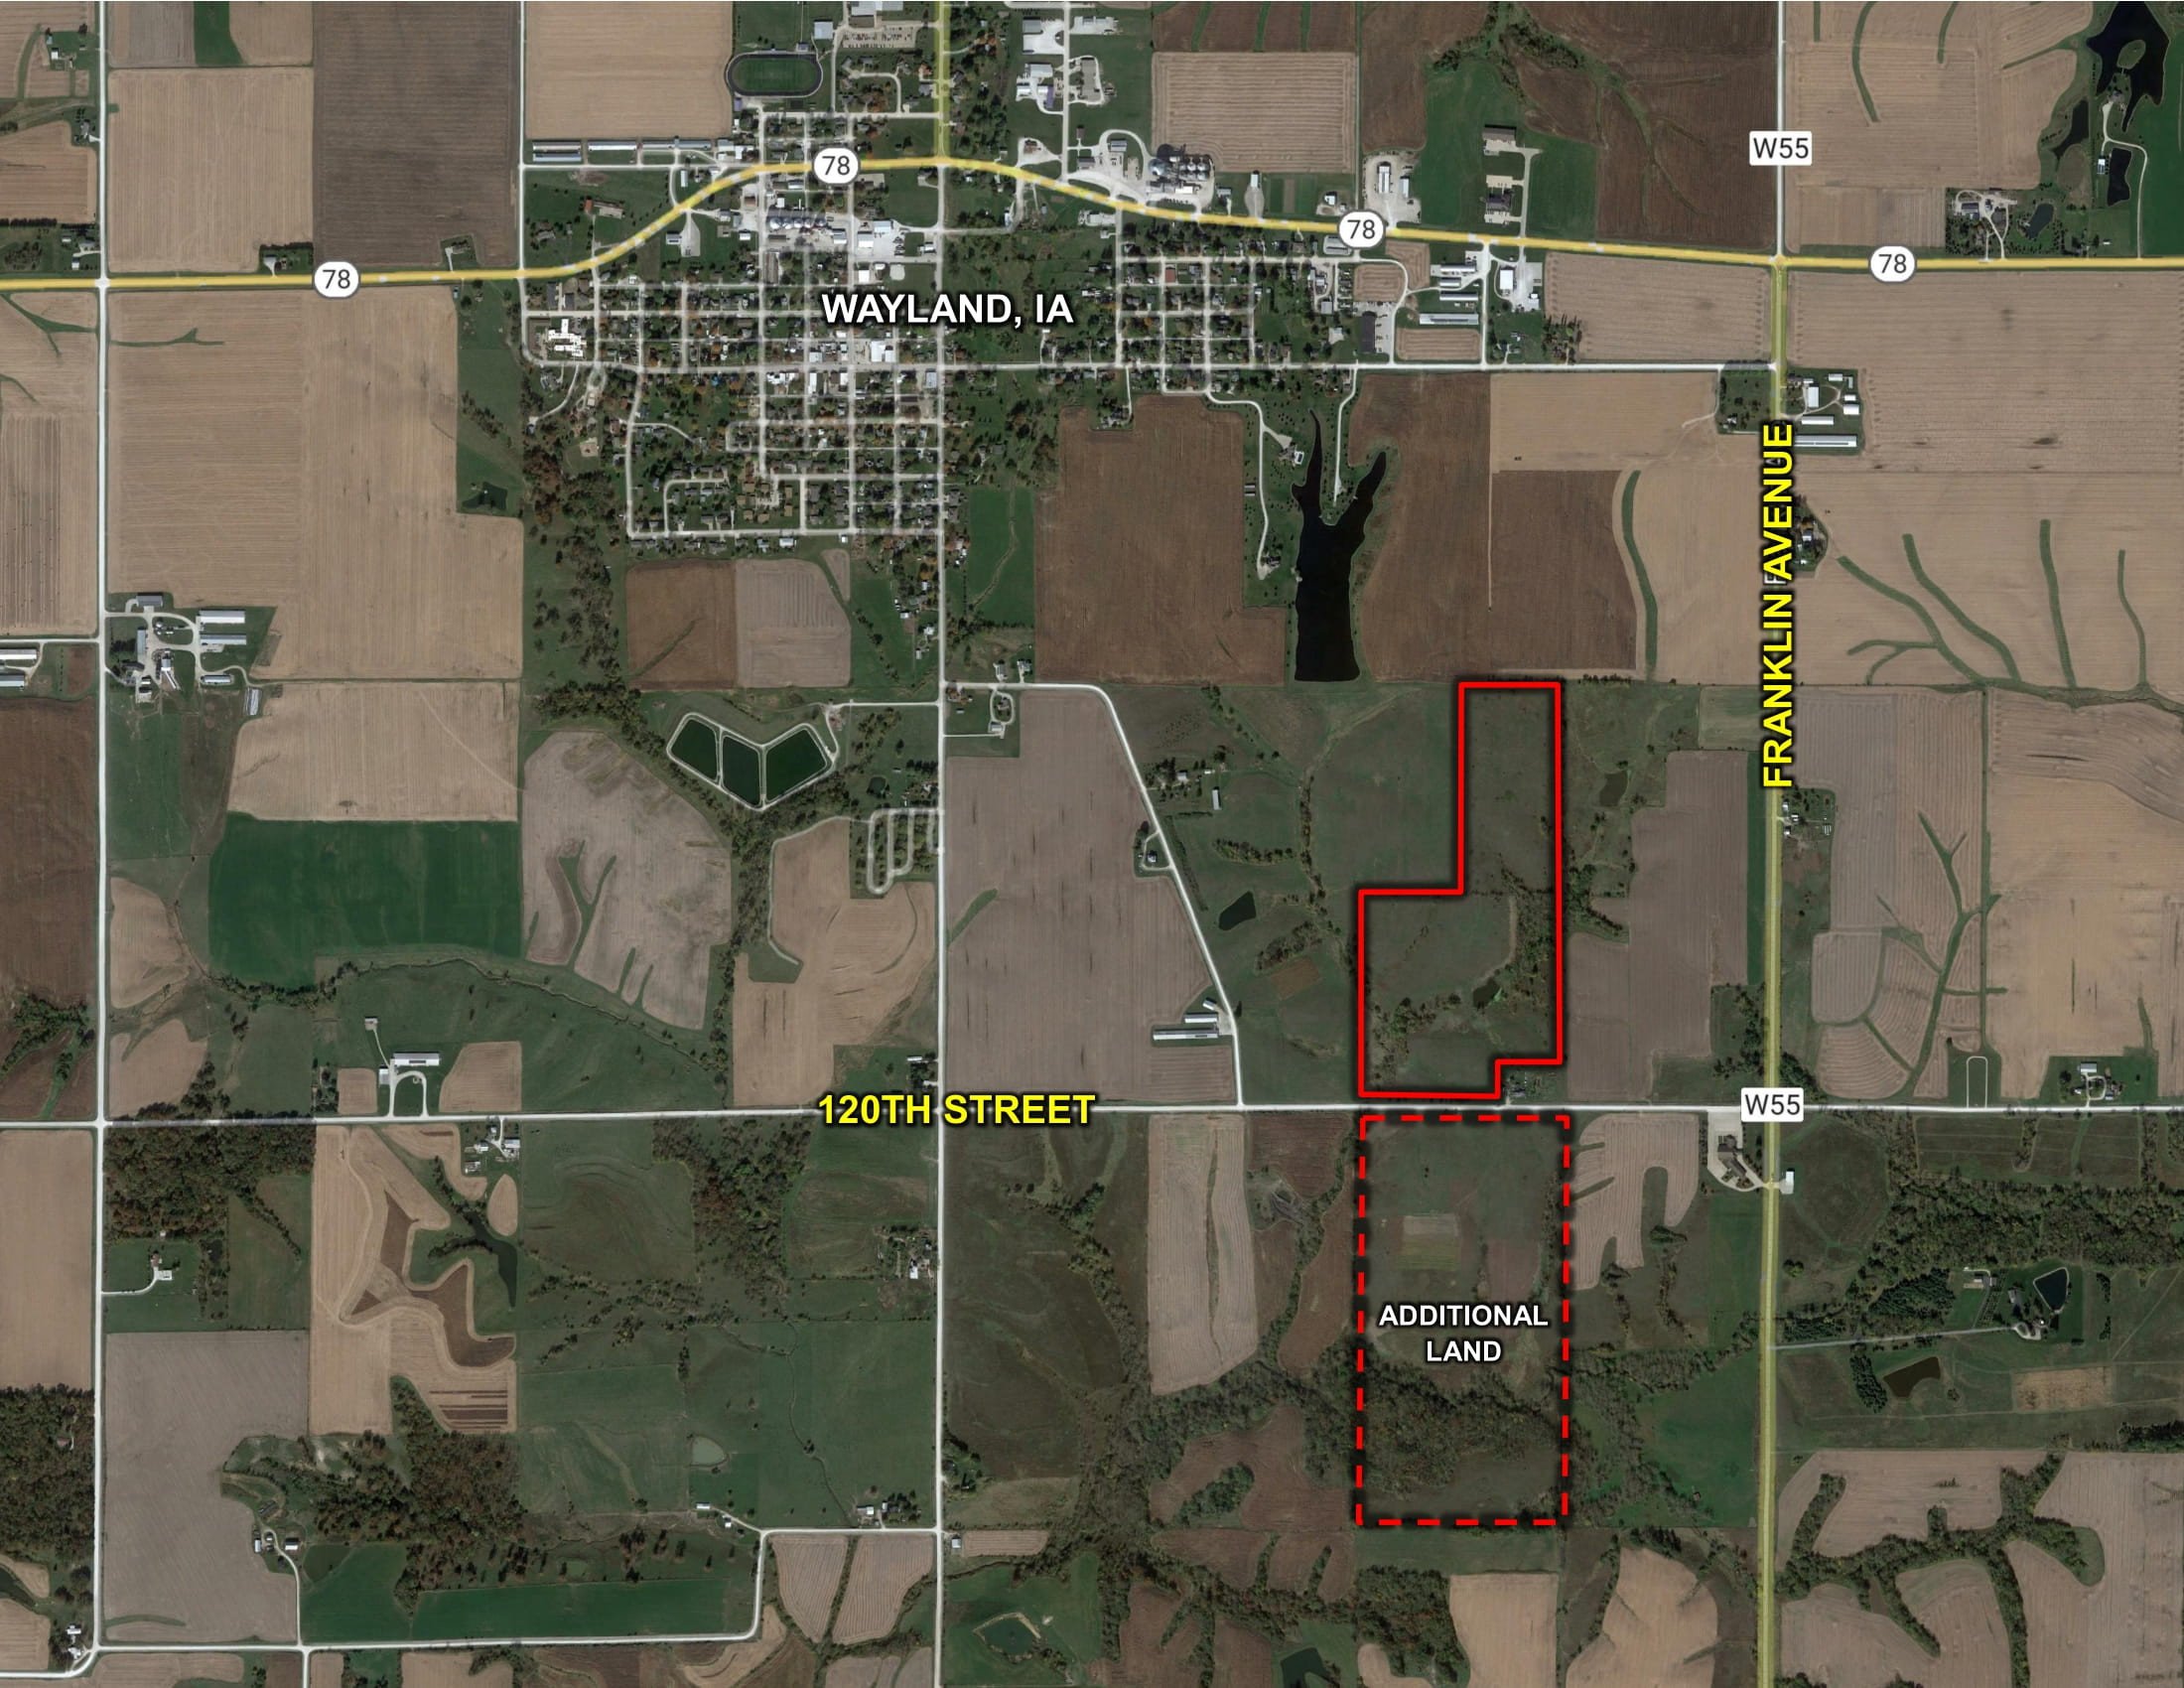 land-henry-county-iowa-57-acres-listing-number-16293-maps-03-3.jpg